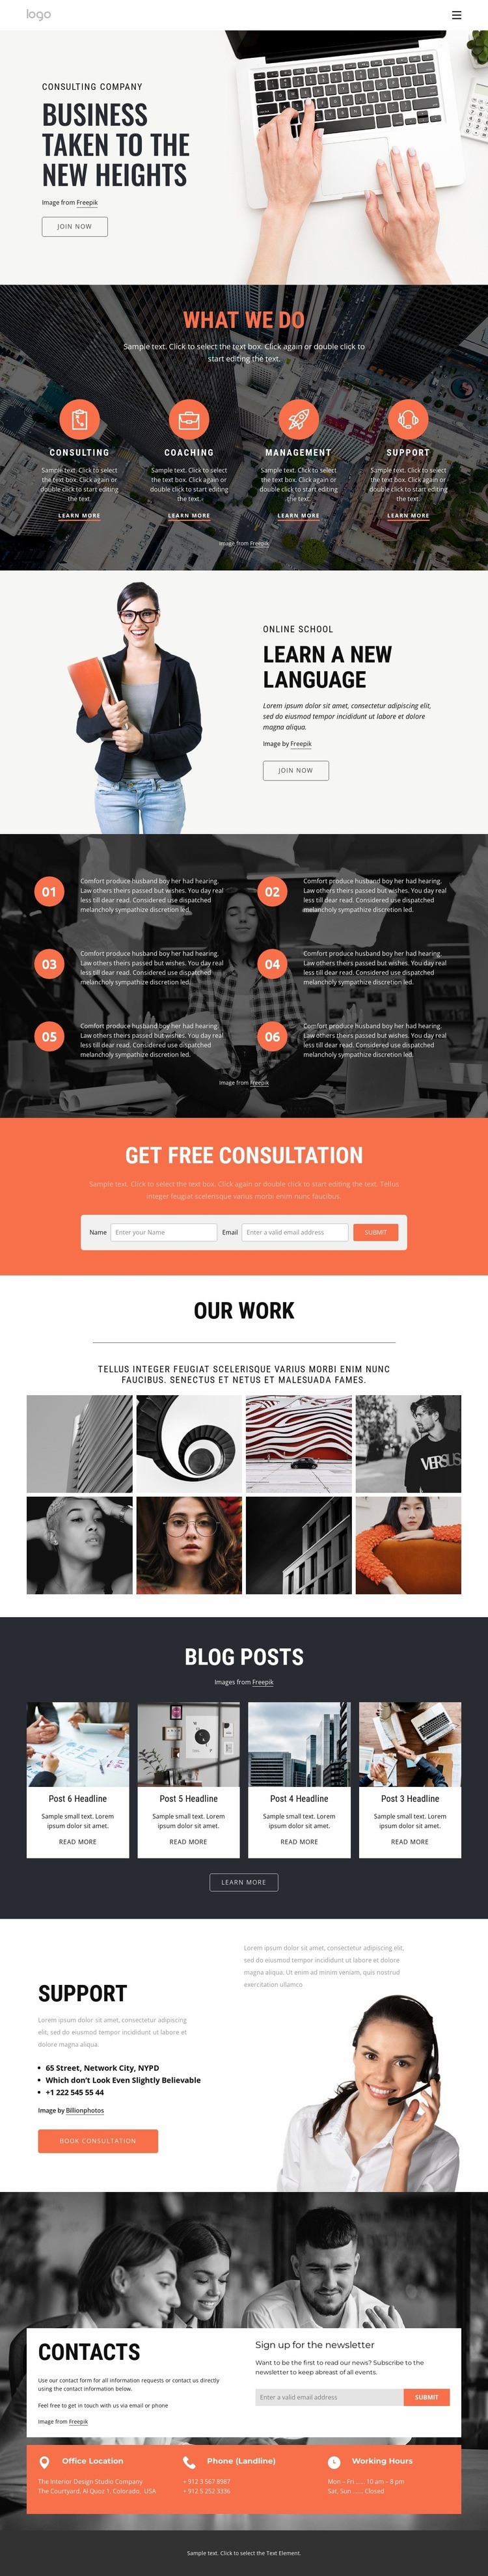 How consulting helps to speed up success Web Page Design